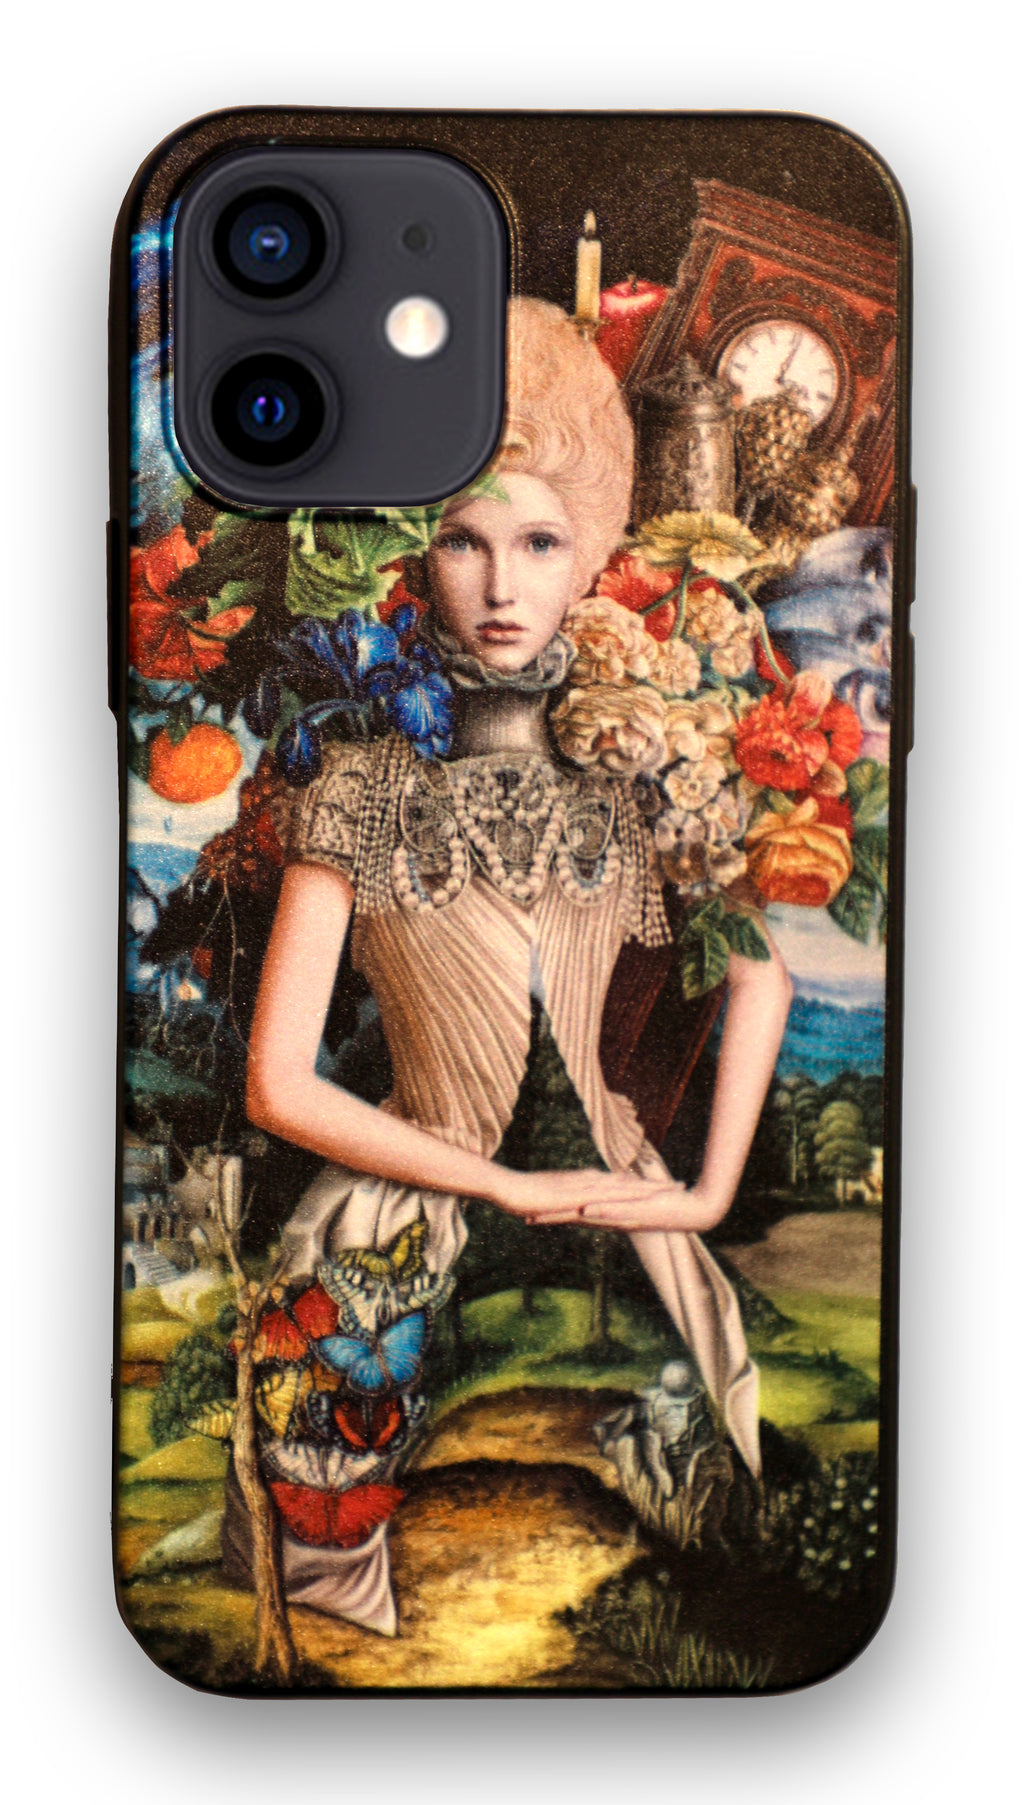 The Mistress of the Mantle iPhone 12 PRO Case.